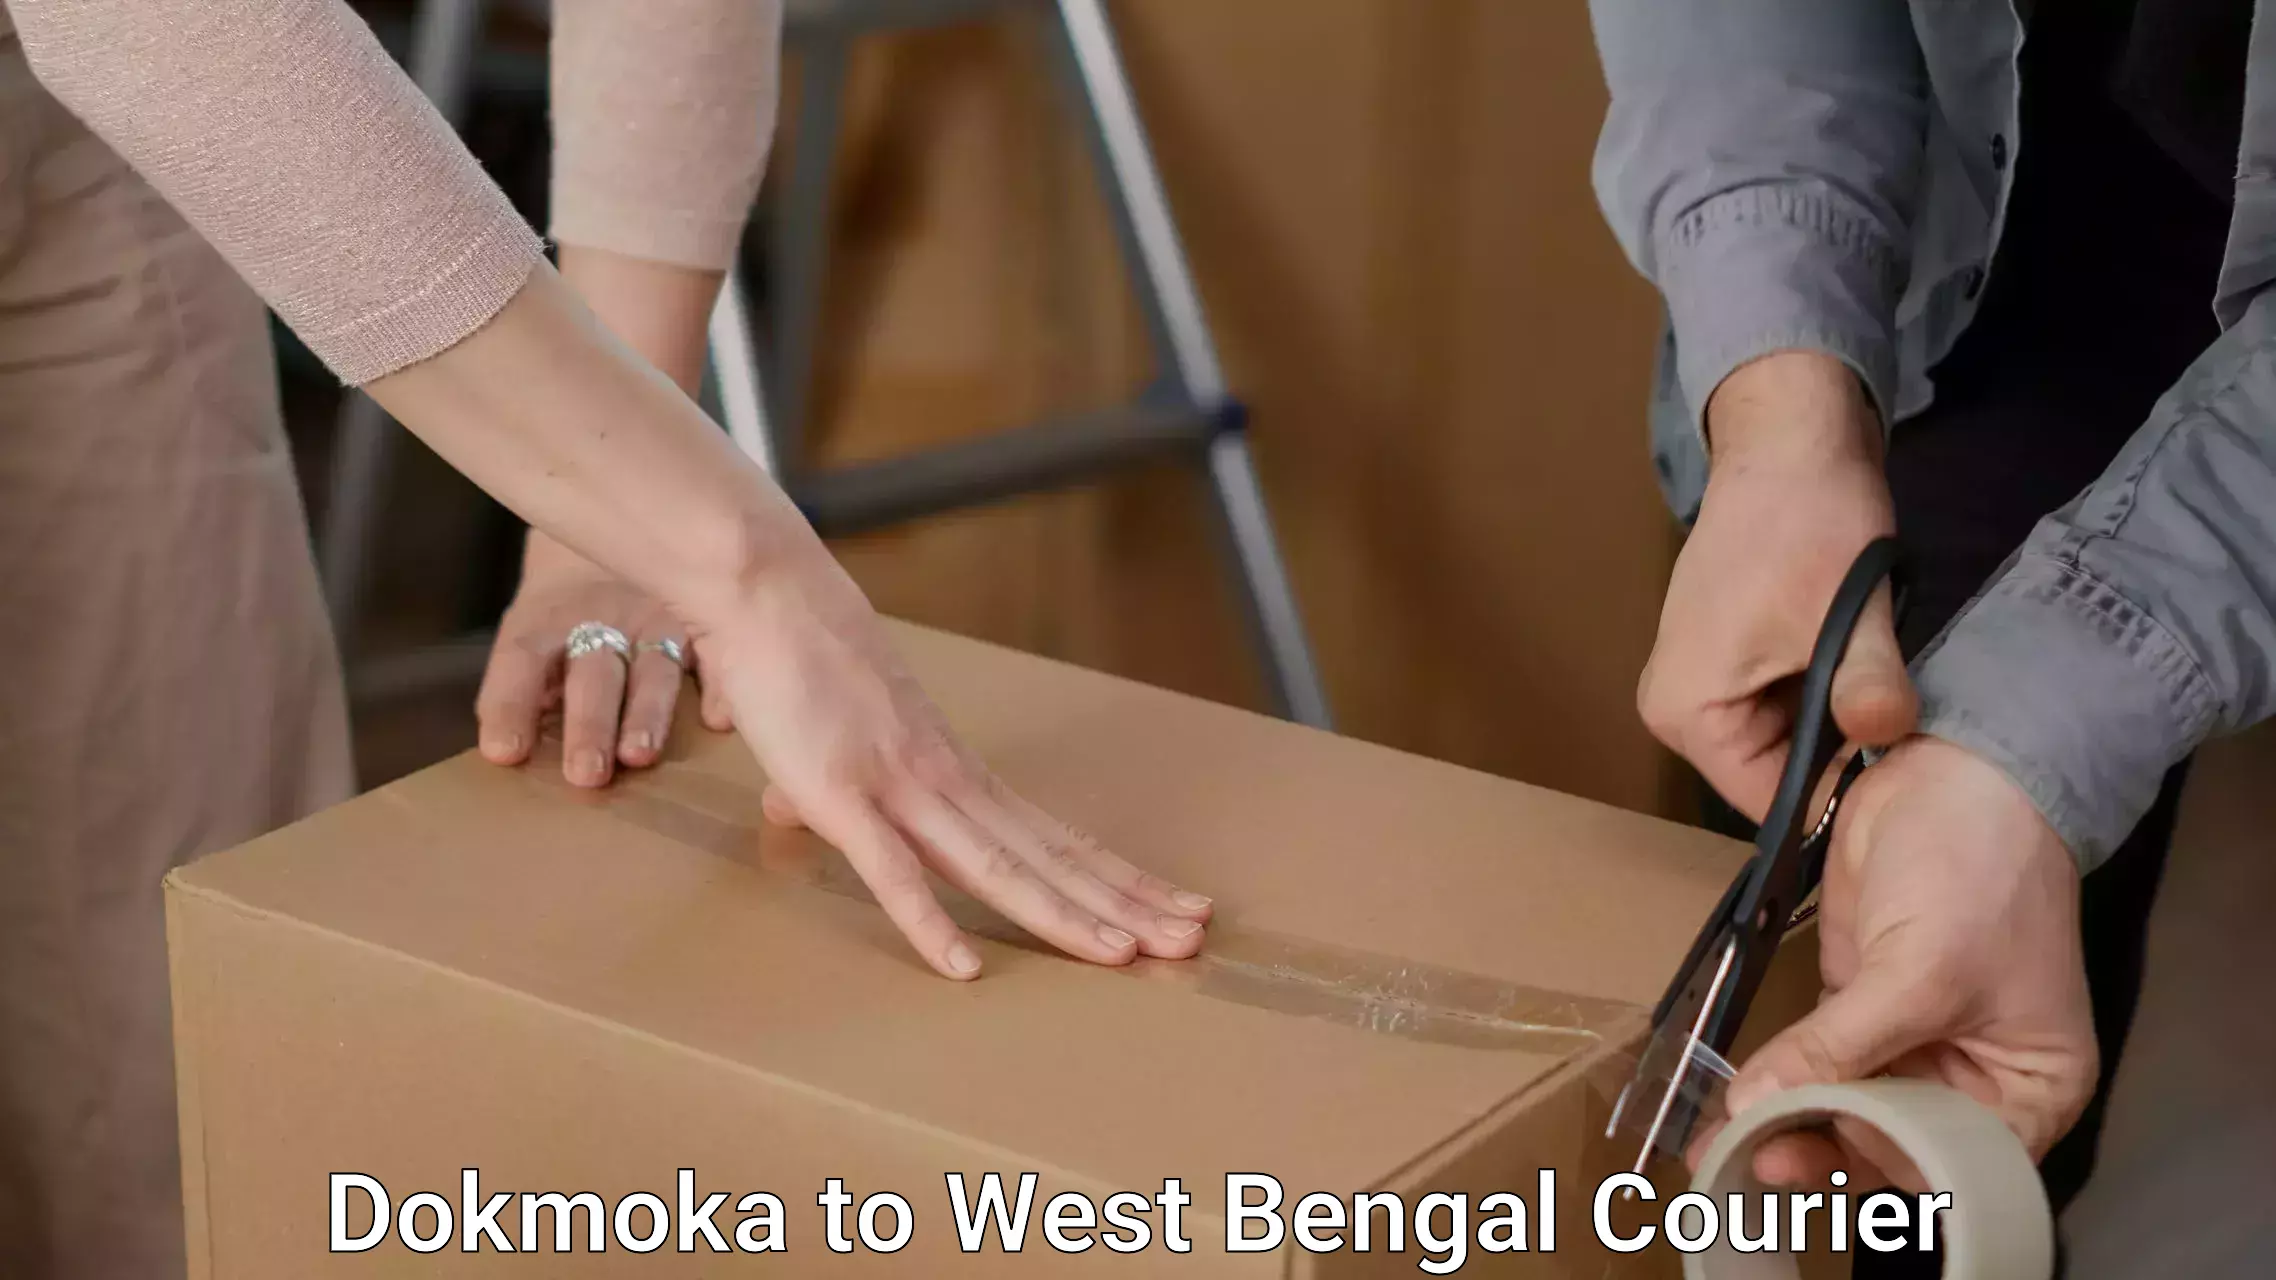 Furniture delivery service Dokmoka to West Bengal